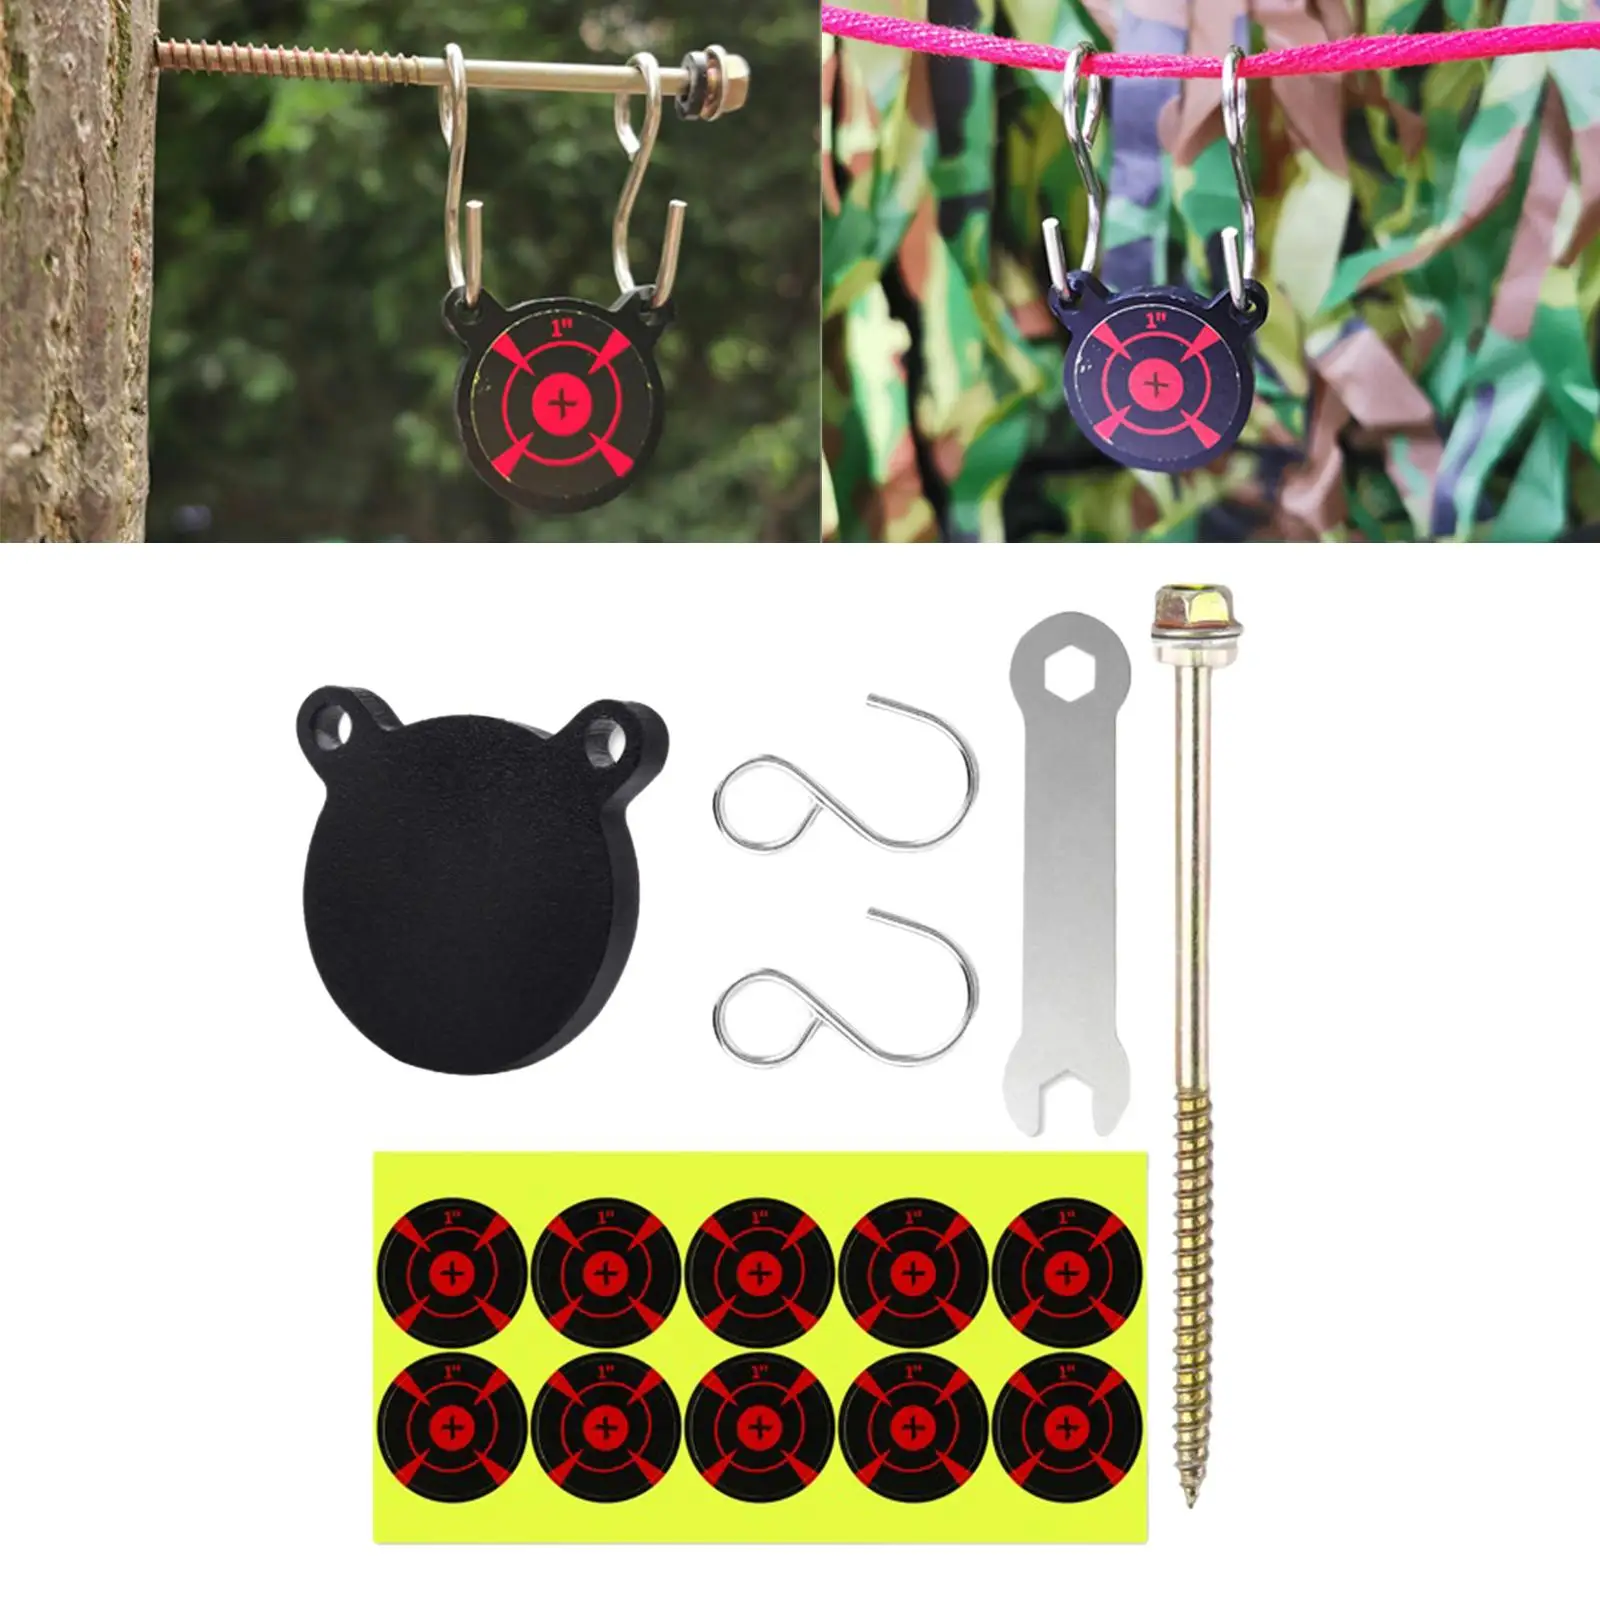 Outdoor Sports Toy Slingshot Practice Target Portable And Resistant Metal Shooting Shooting Practice Target Hunting Games